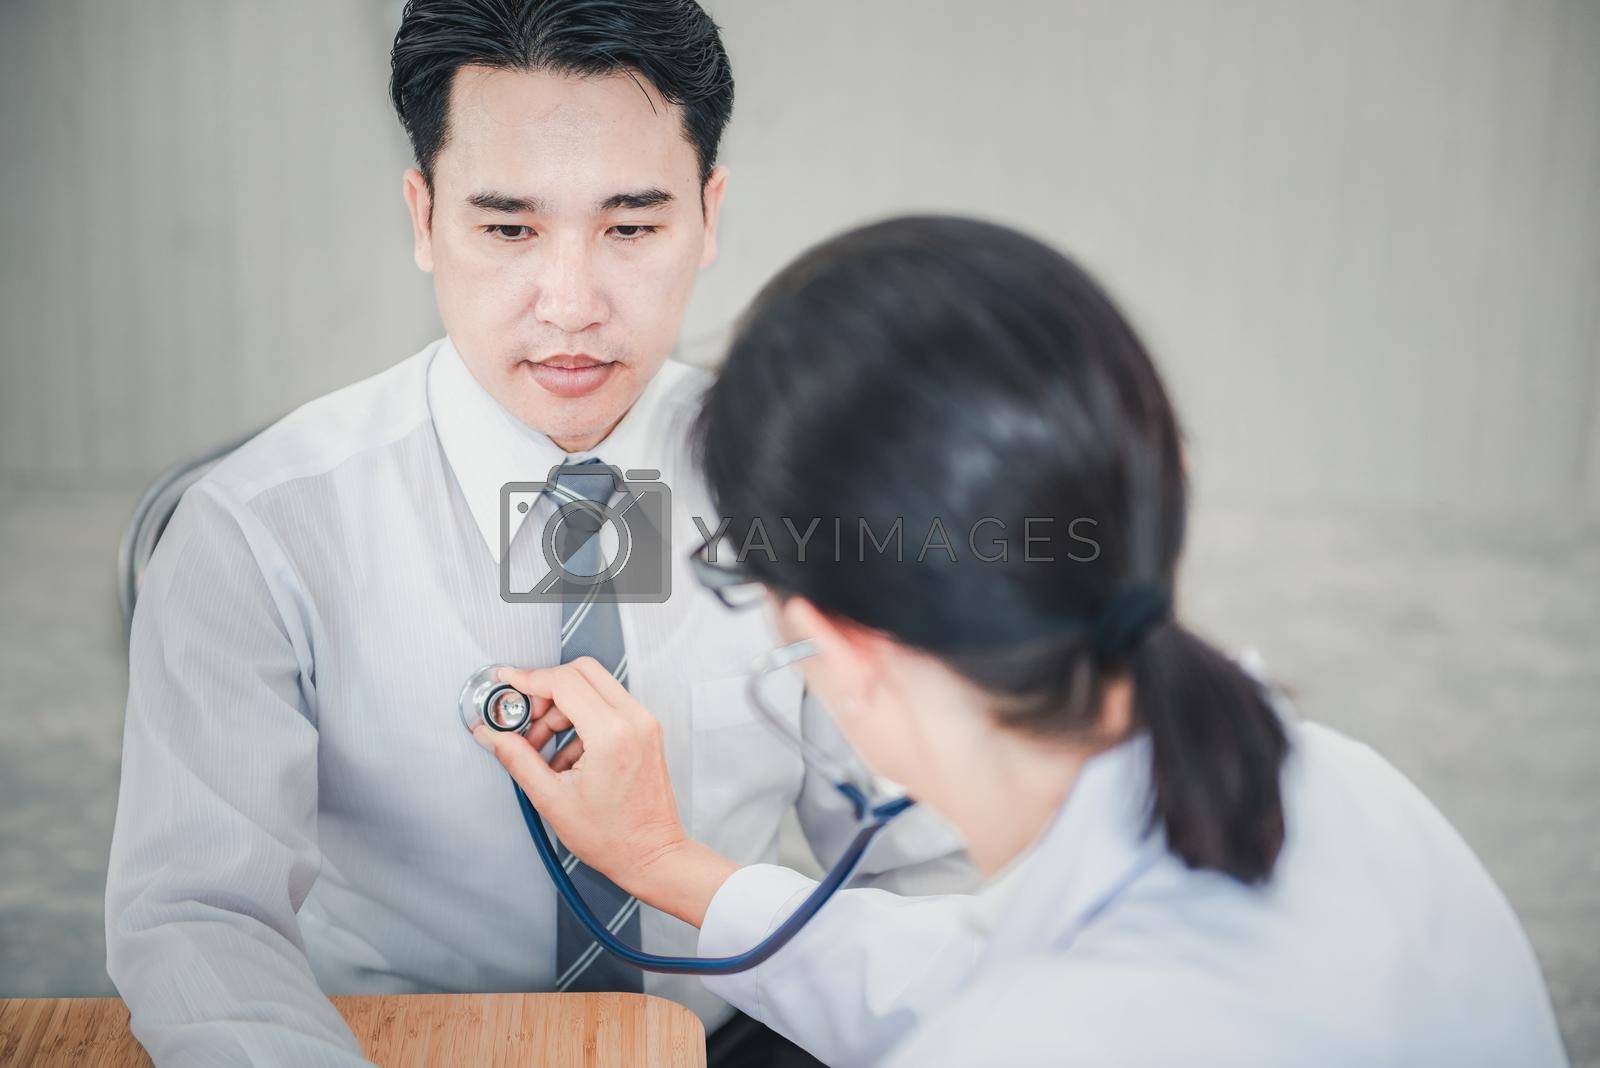 Royalty free image of Medical Doctor is Examining Patient Health With Stethoscope in Hospital Examination Room, Female Physician Doctor is Diagnosing Physical Health Check Up for Male Patient. Medicine/Healthcare Concept by MahaHeang245789